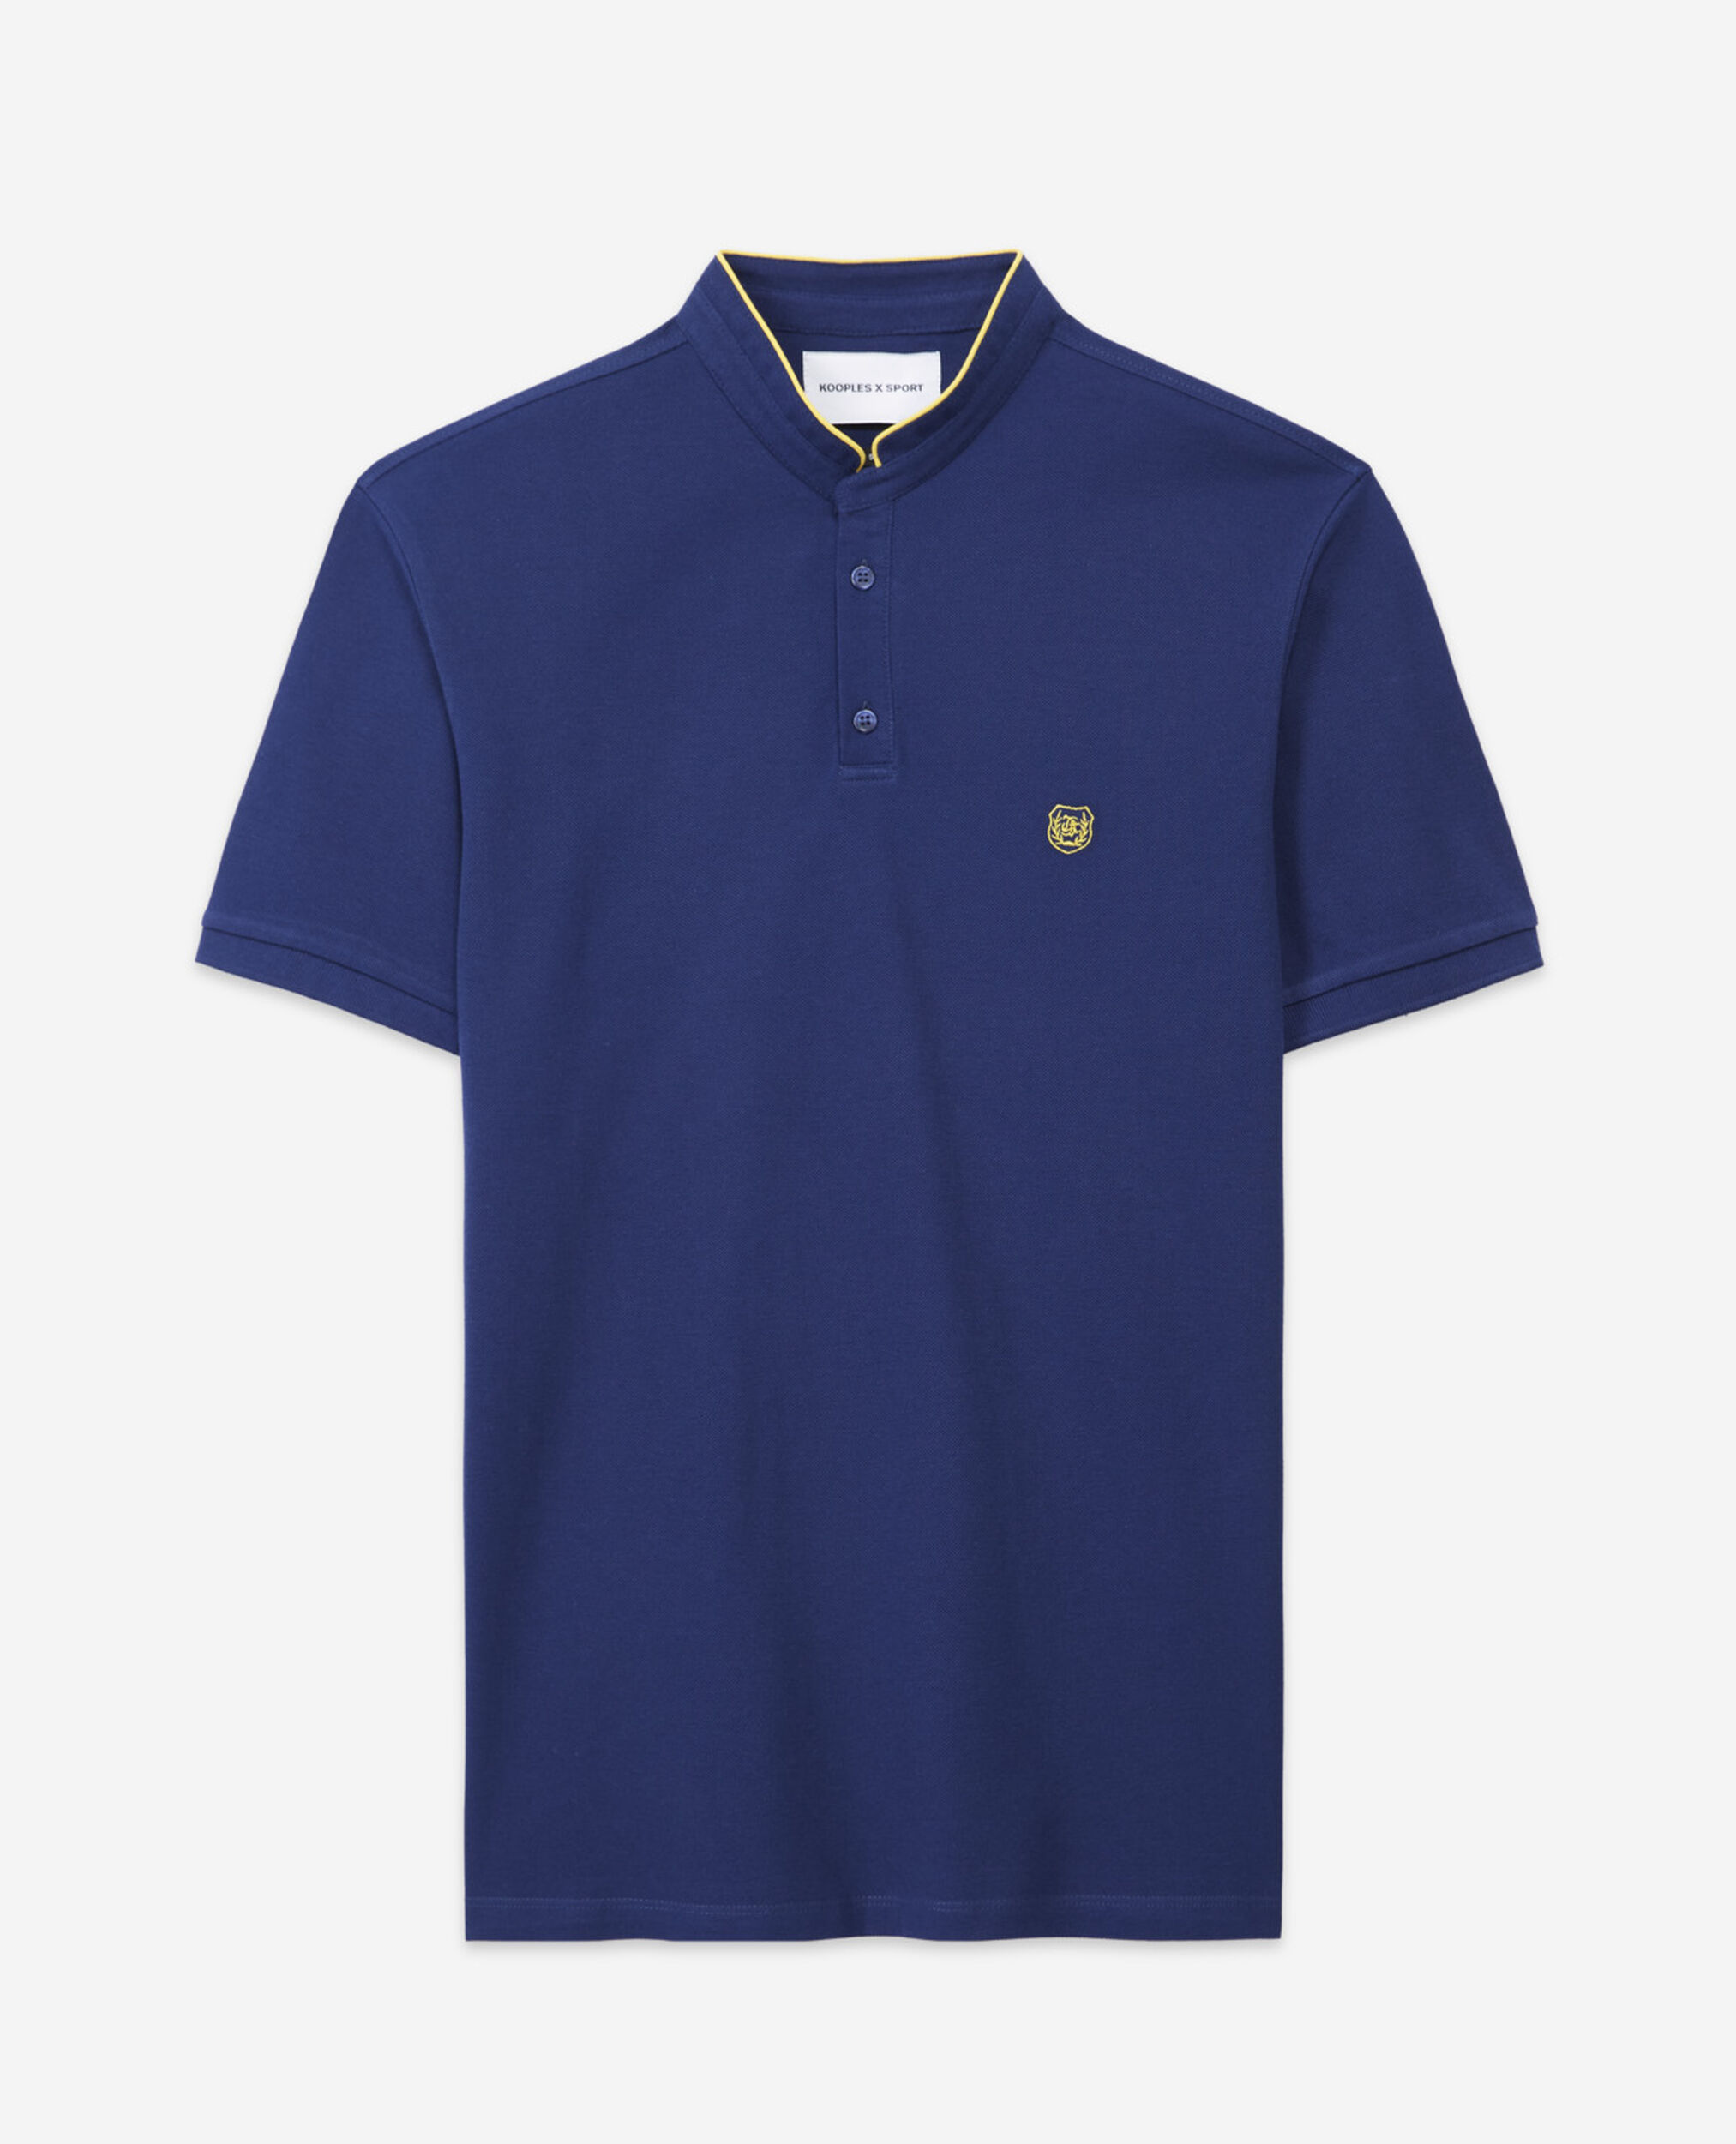 Marineblaues Jersey-Poloshirt mit Details, OFFICER NVY/DANDELION YLW, hi-res image number null